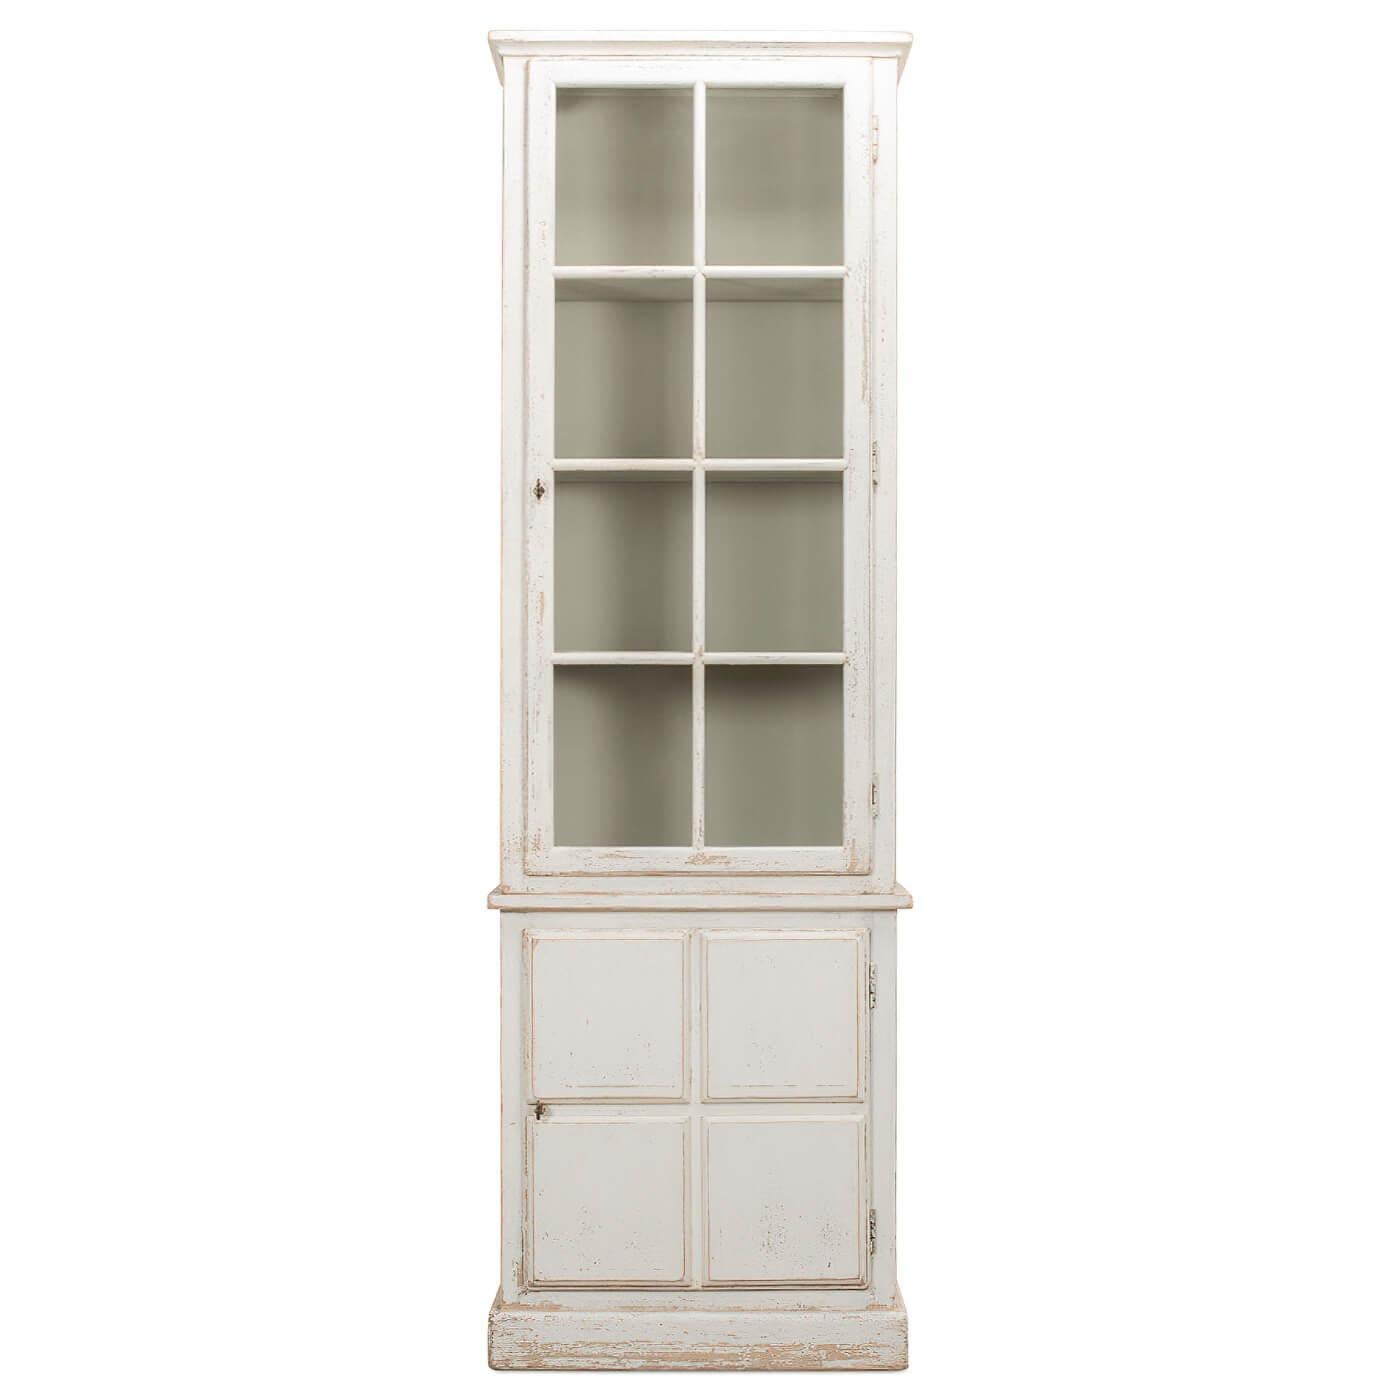 An antiqued white bookcase crafted with pine. This beautiful piece has a glass-paned upper cabinet with a painted grey interior and one lower cabinet with a door. It includes four removable shelves. This is a great piece for storage and